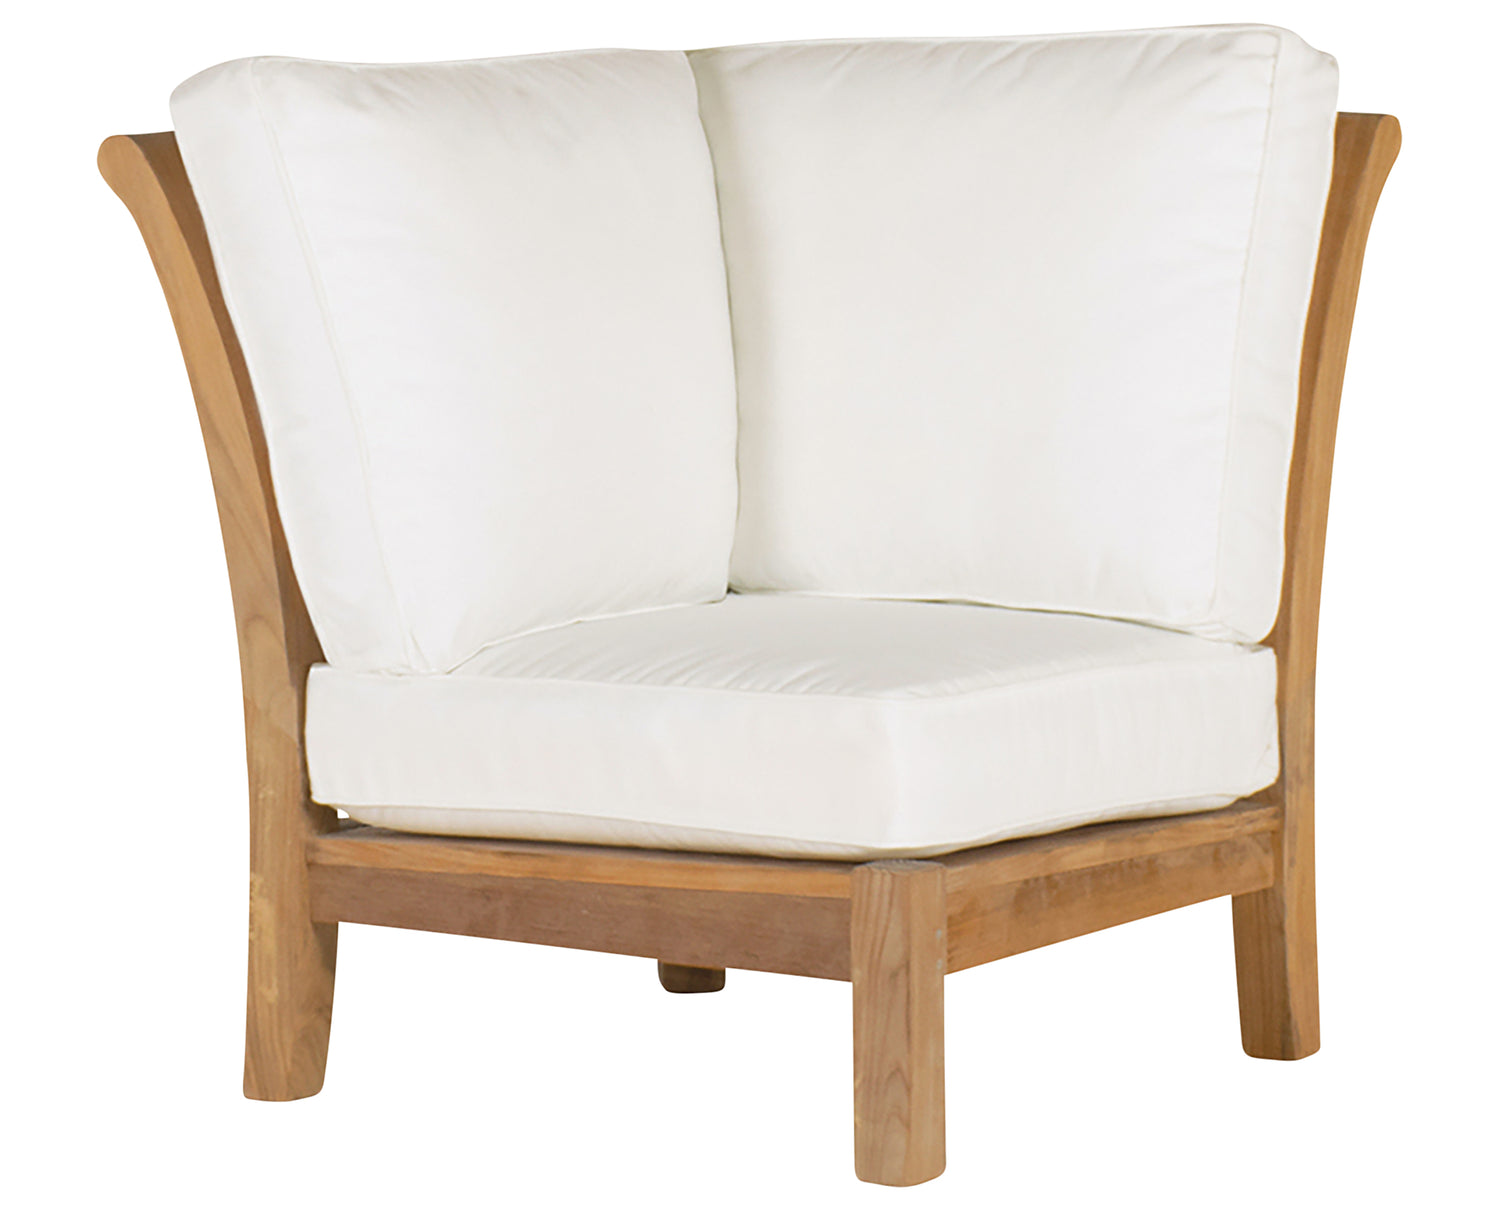 Sectional Corner Chair | Kingsley Bate Chelsea Collection | Valley Ridge Furniture